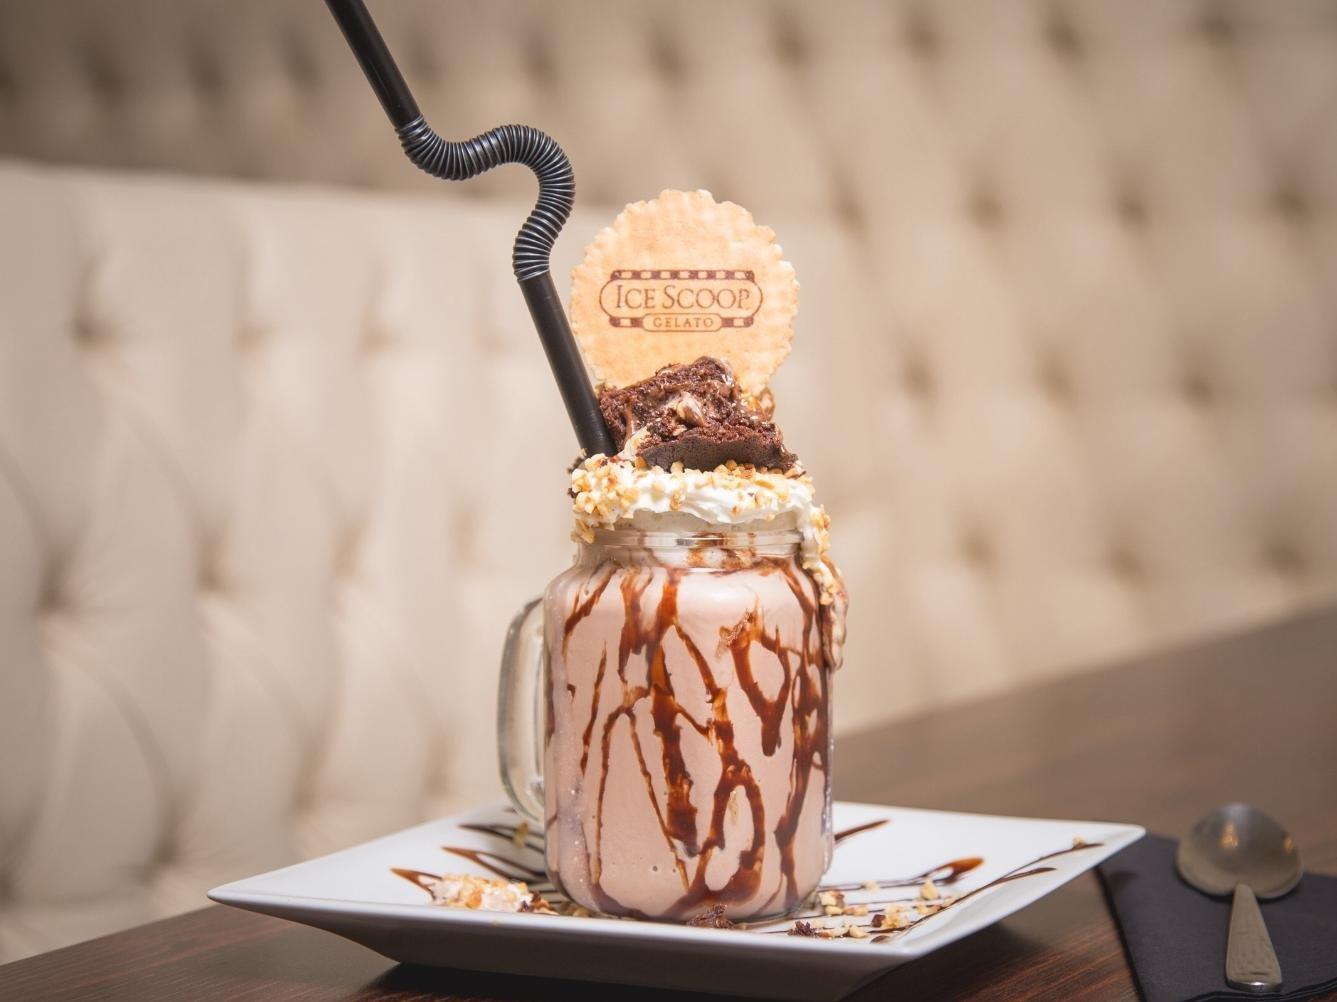 One reviewer said: 'Their milkshakes are simply the best, made from the most delicious, full of flavors ice-cream. I enjoyed their delicate waffles and giant sundaes.'